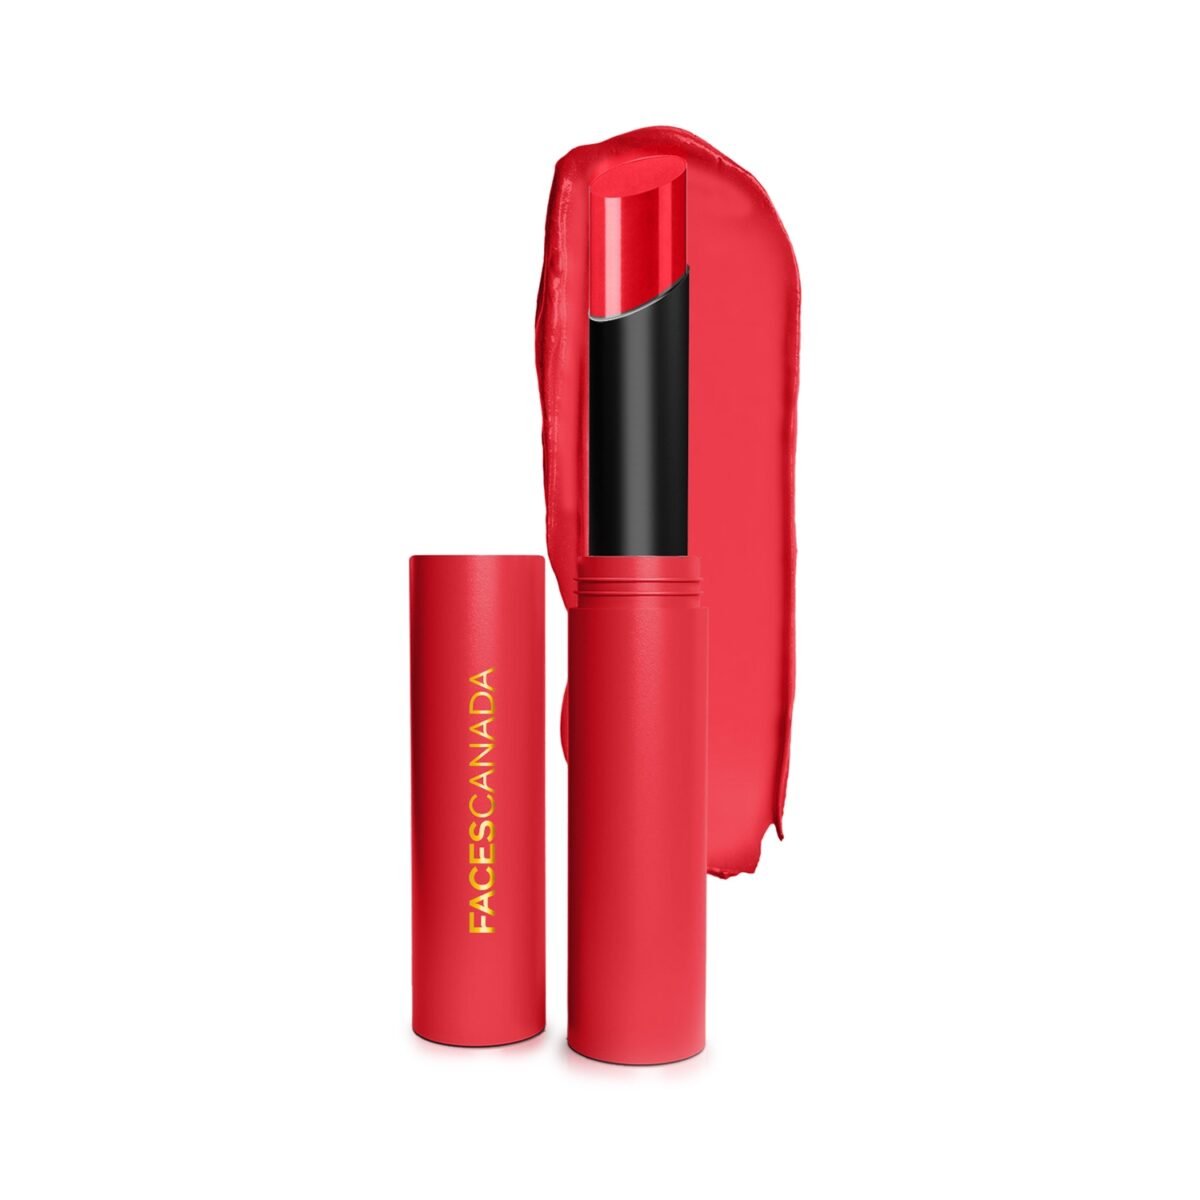 Faces Canada Long Stay Matte Lipstick, 09 Showstop Red 2g